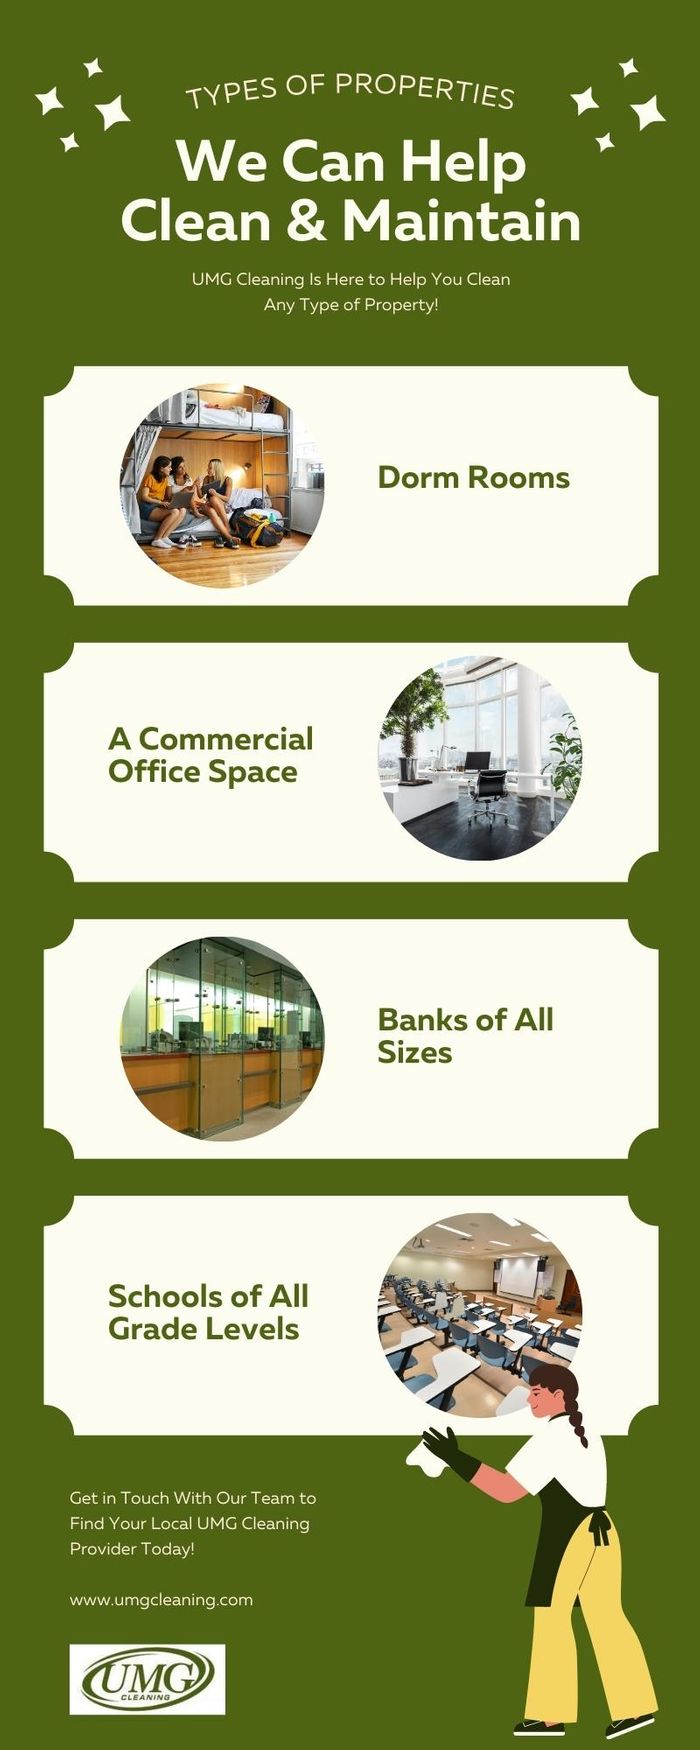 Types of Properties We Can Help Clean and Maintain Infographic.jpg